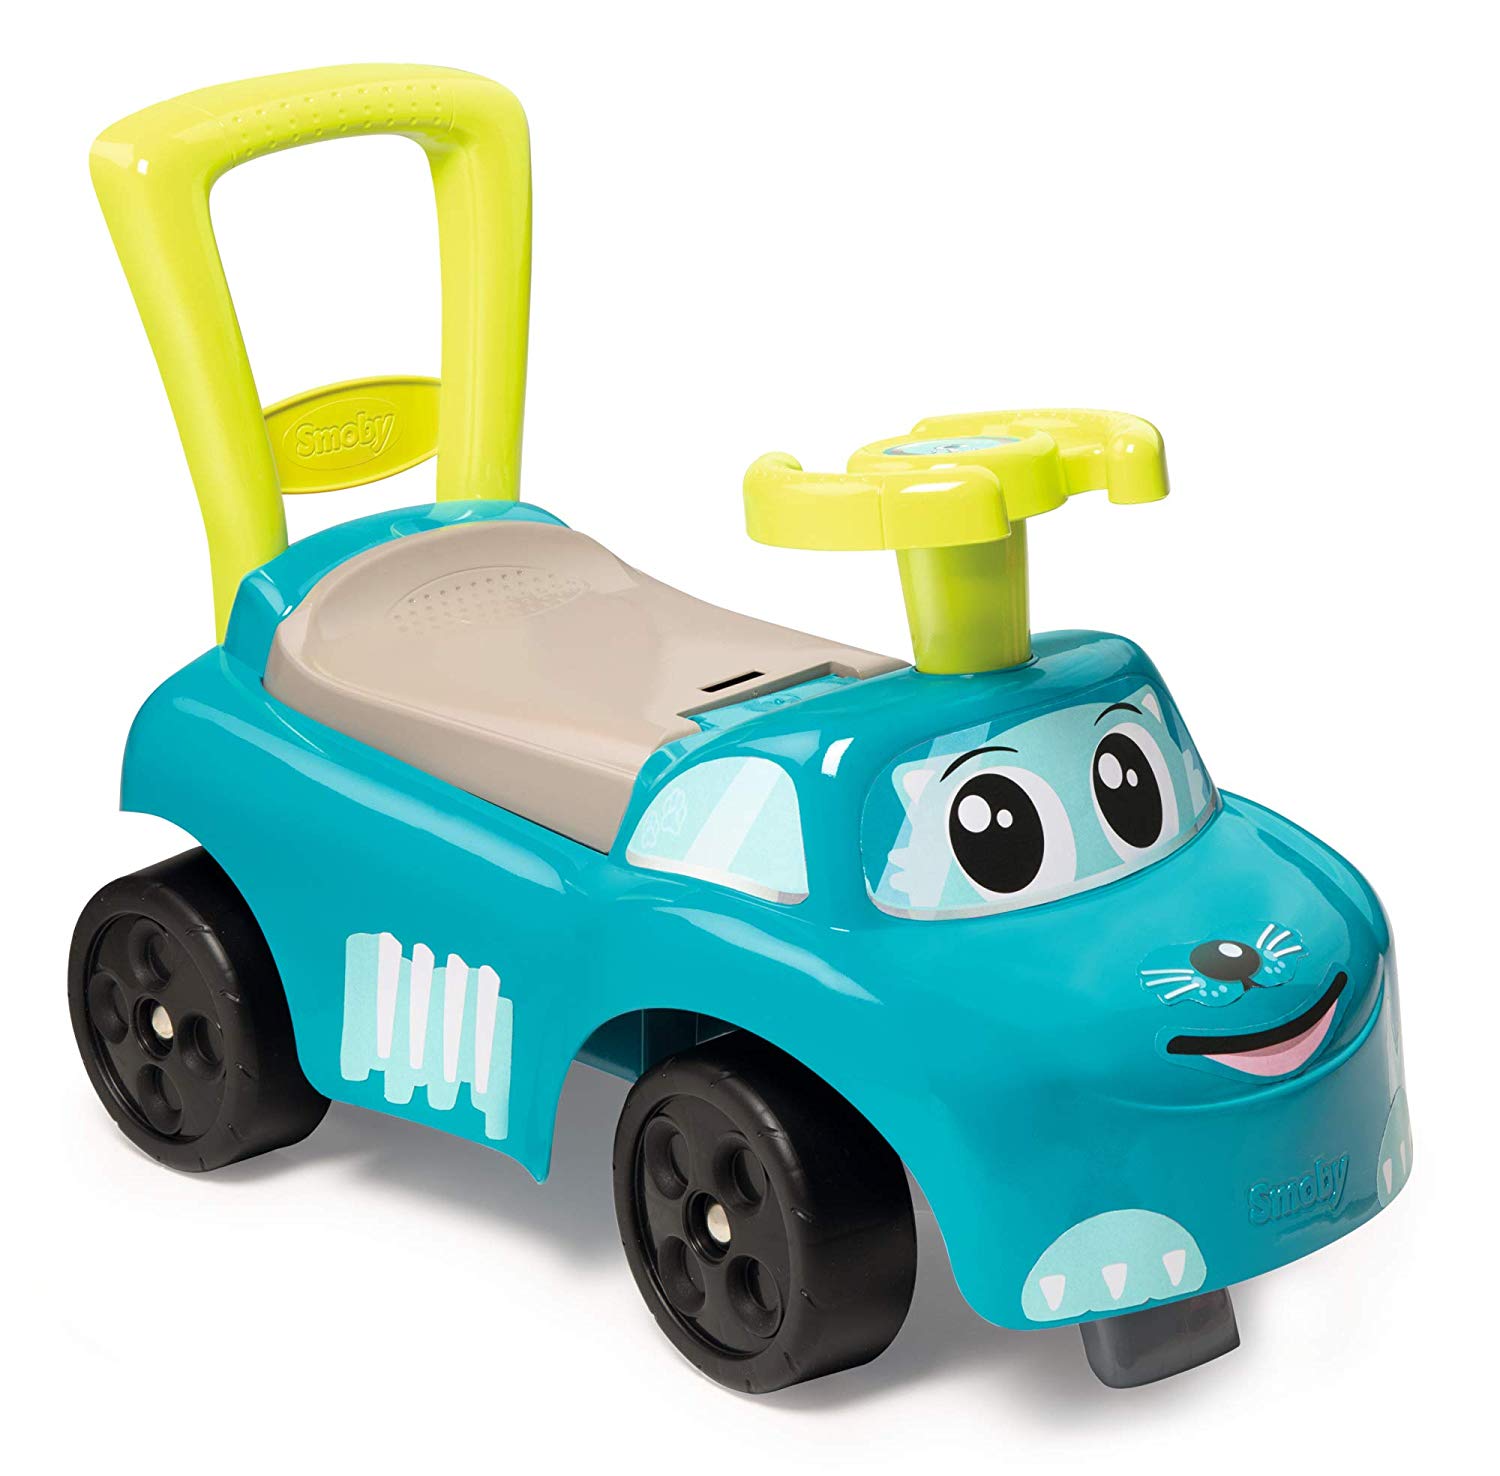 Smoby 720525 My First Car Ride On Toy Blue